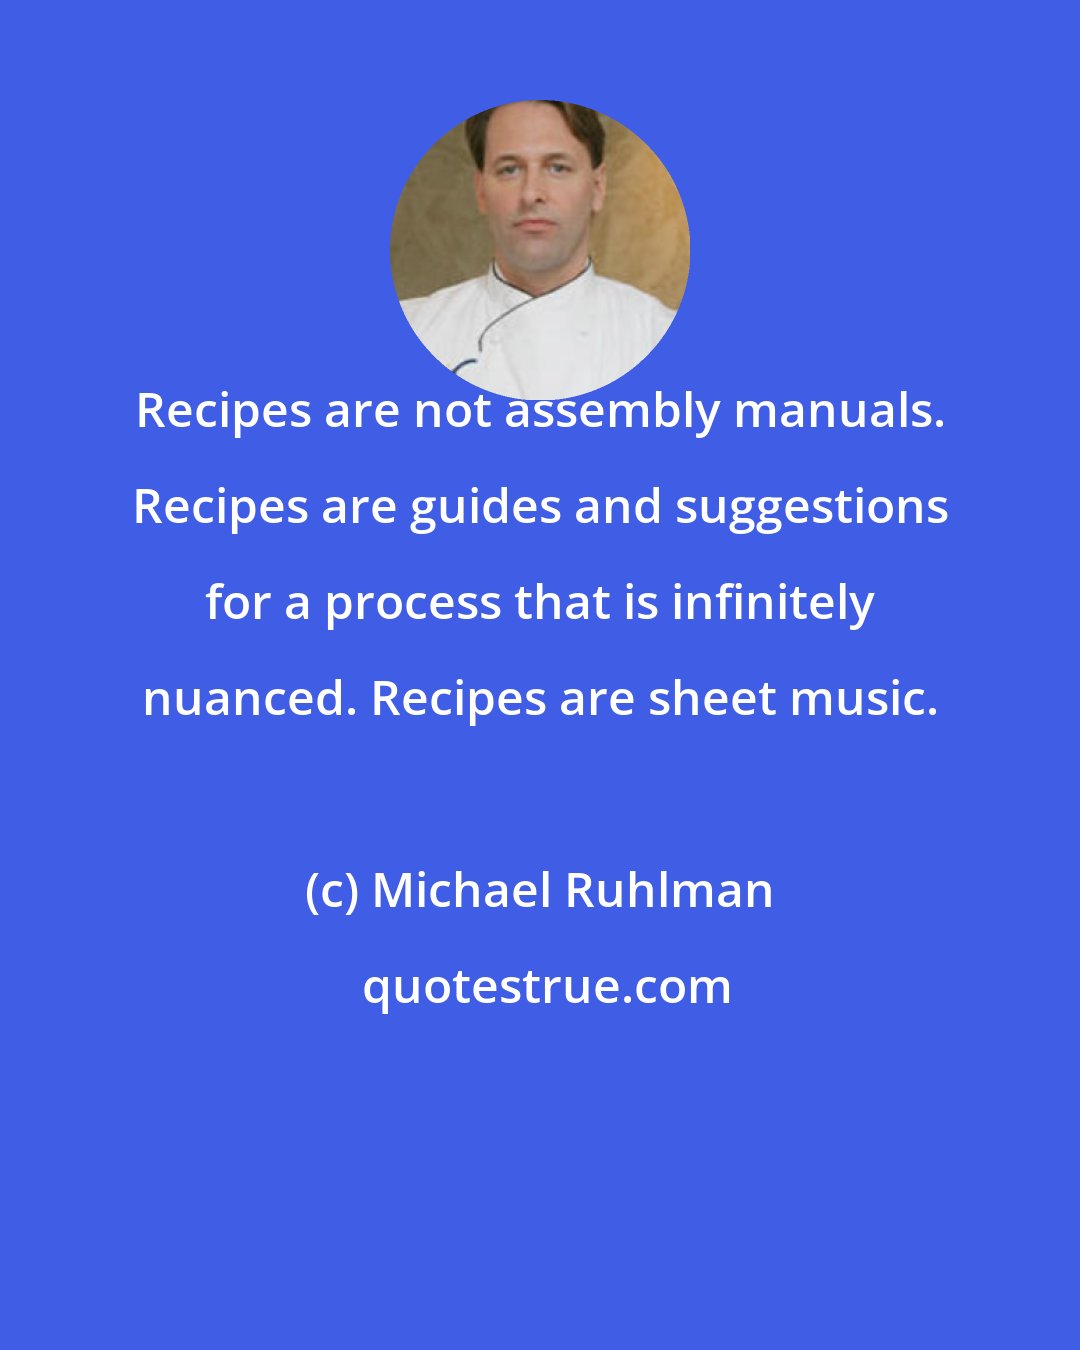 Michael Ruhlman: Recipes are not assembly manuals. Recipes are guides and suggestions for a process that is infinitely nuanced. Recipes are sheet music.